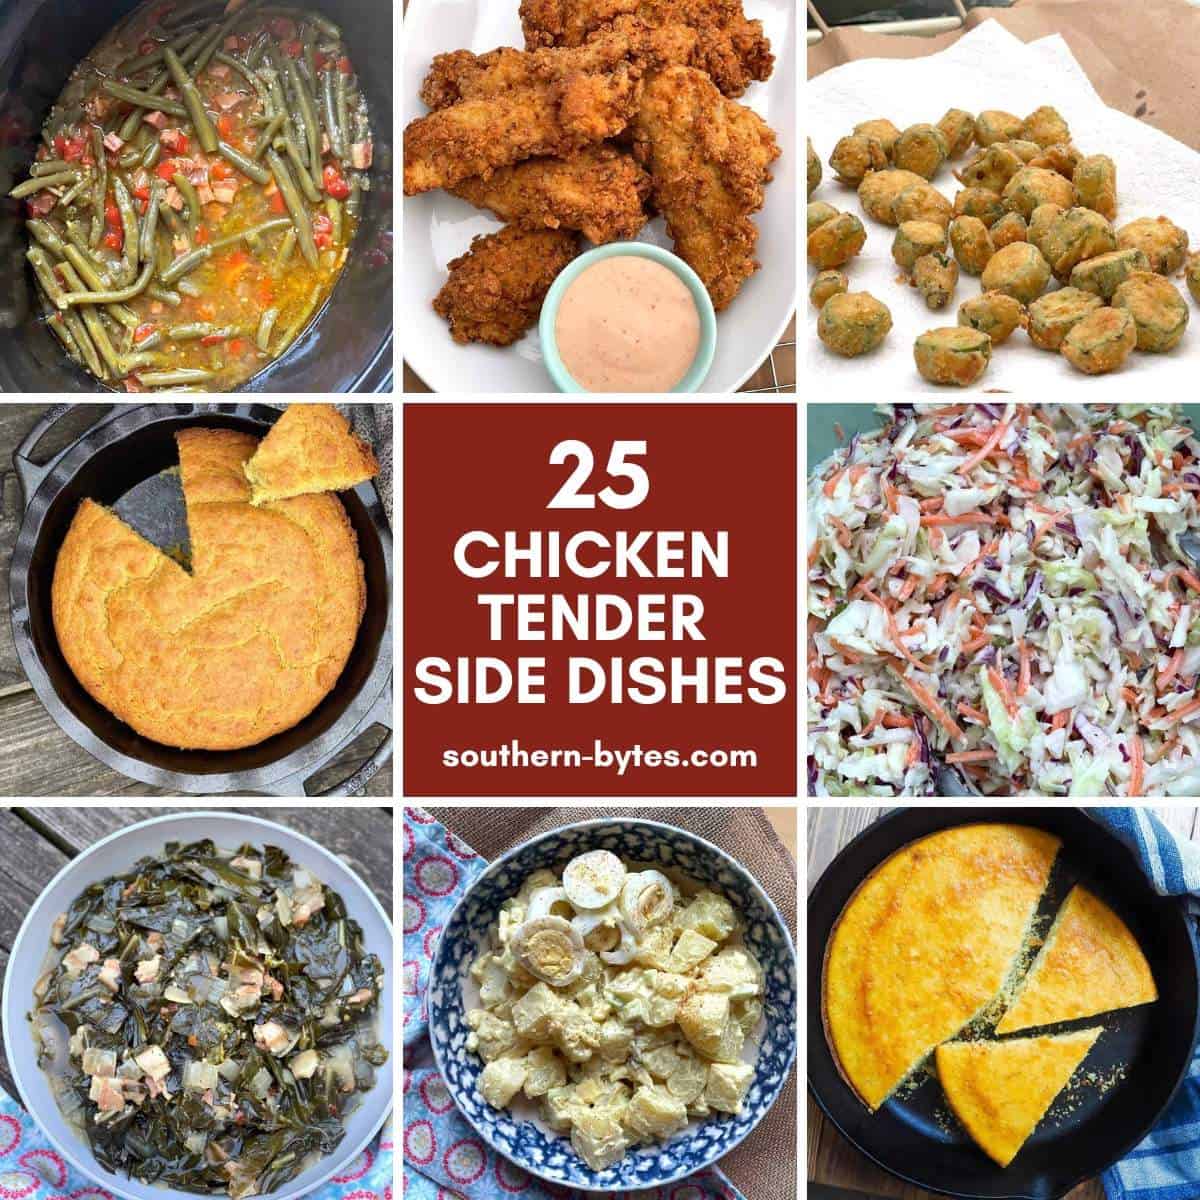 A collage of images showing chicken tender side dishes - cornbread, dipping sauce, coleslaw, green beans, and okra.